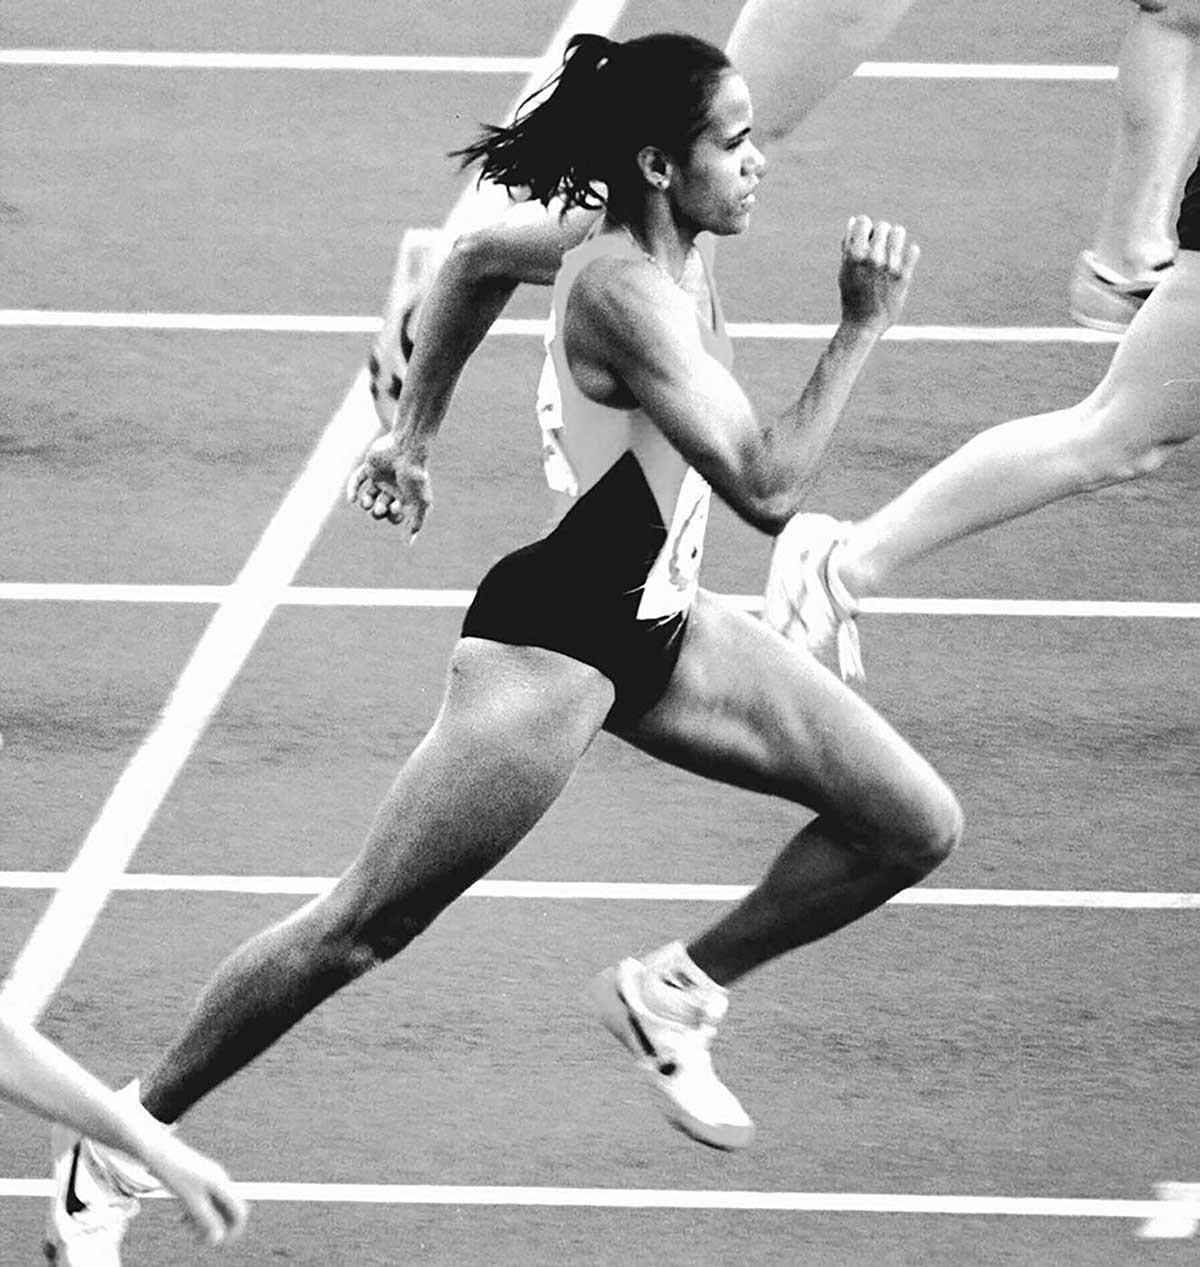 Black and white photograph of Cathy Freeman competing in a sprinting race.